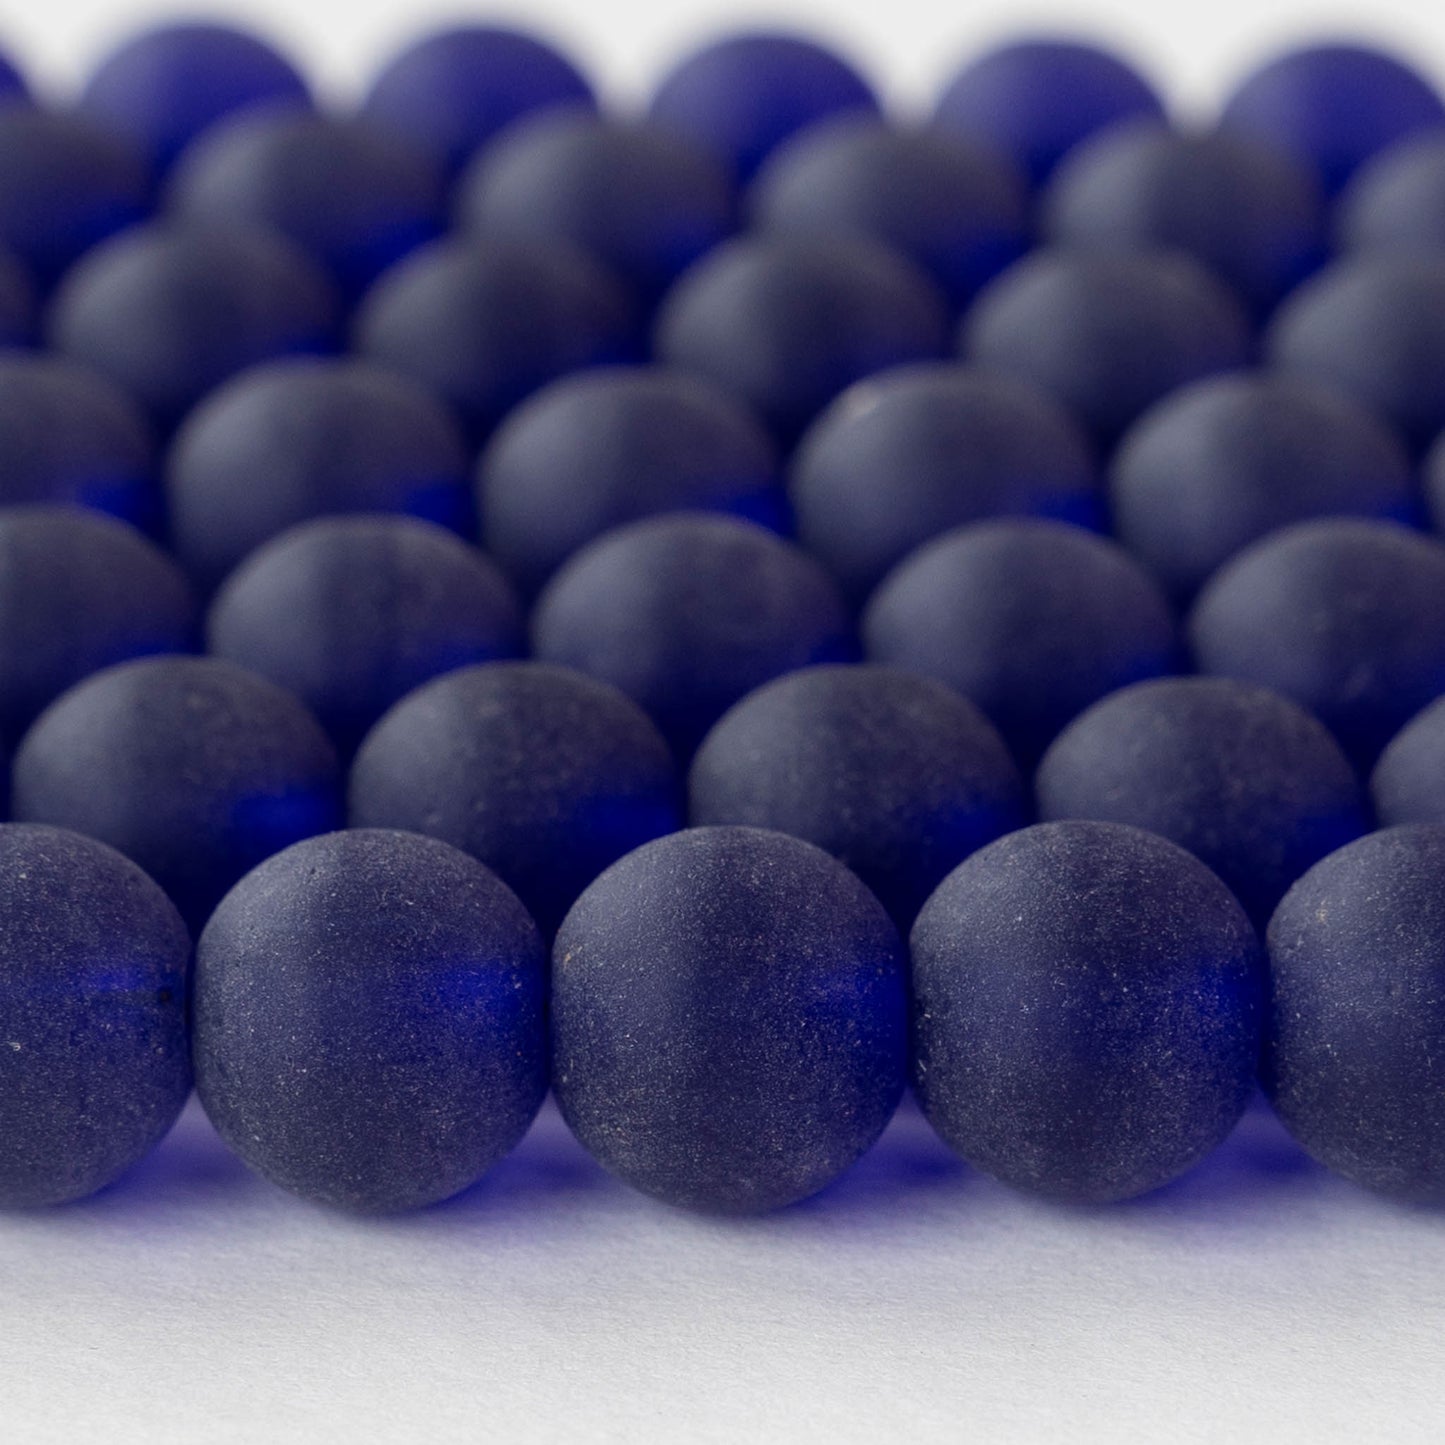 12mm Frosted Glass Round Beads - Cobalt Blue - 12 or 36